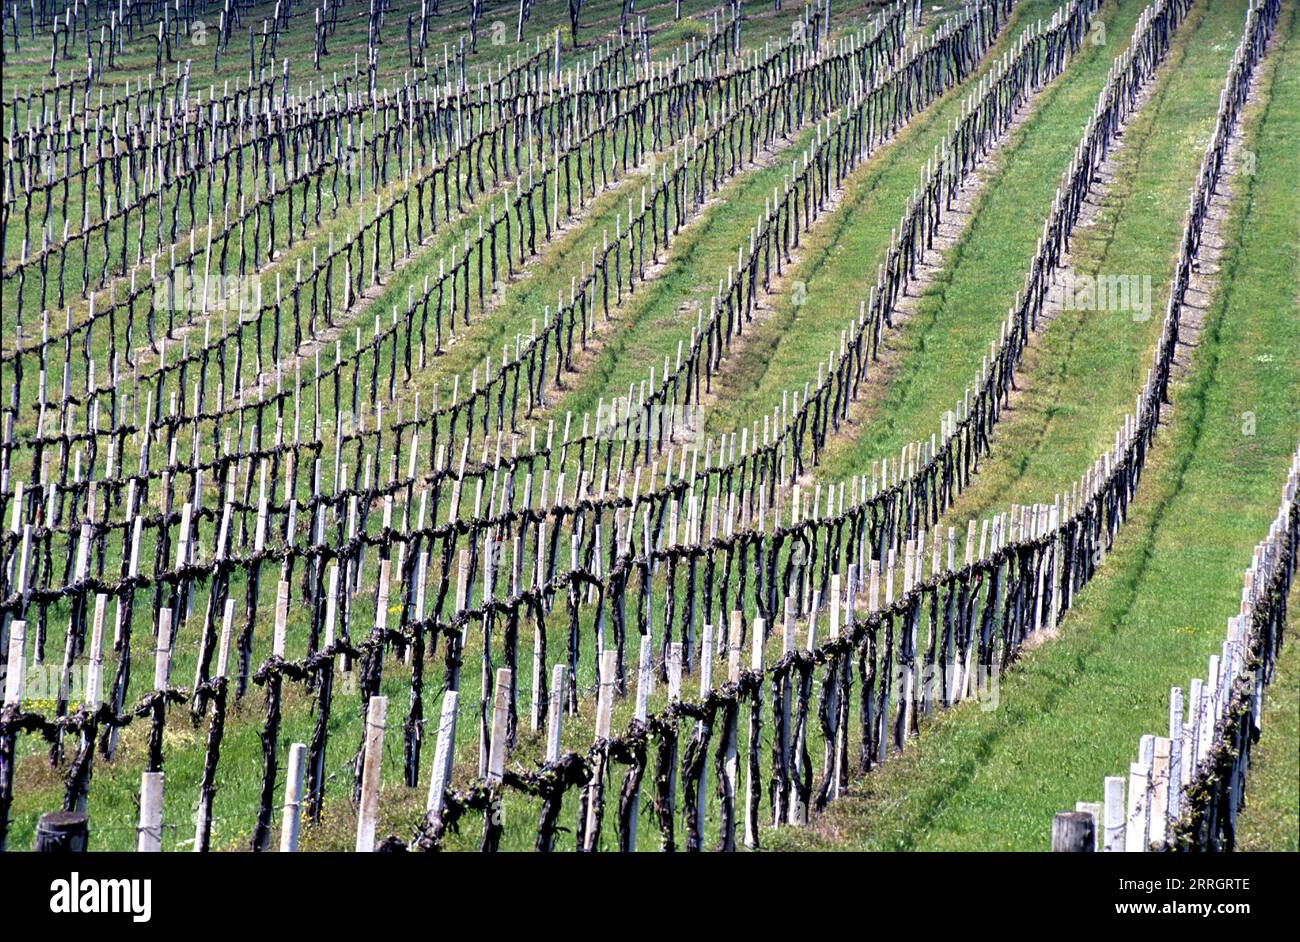 Aerial view of vines in a row at a vineyard in Tuscany, Italy Stock Photo